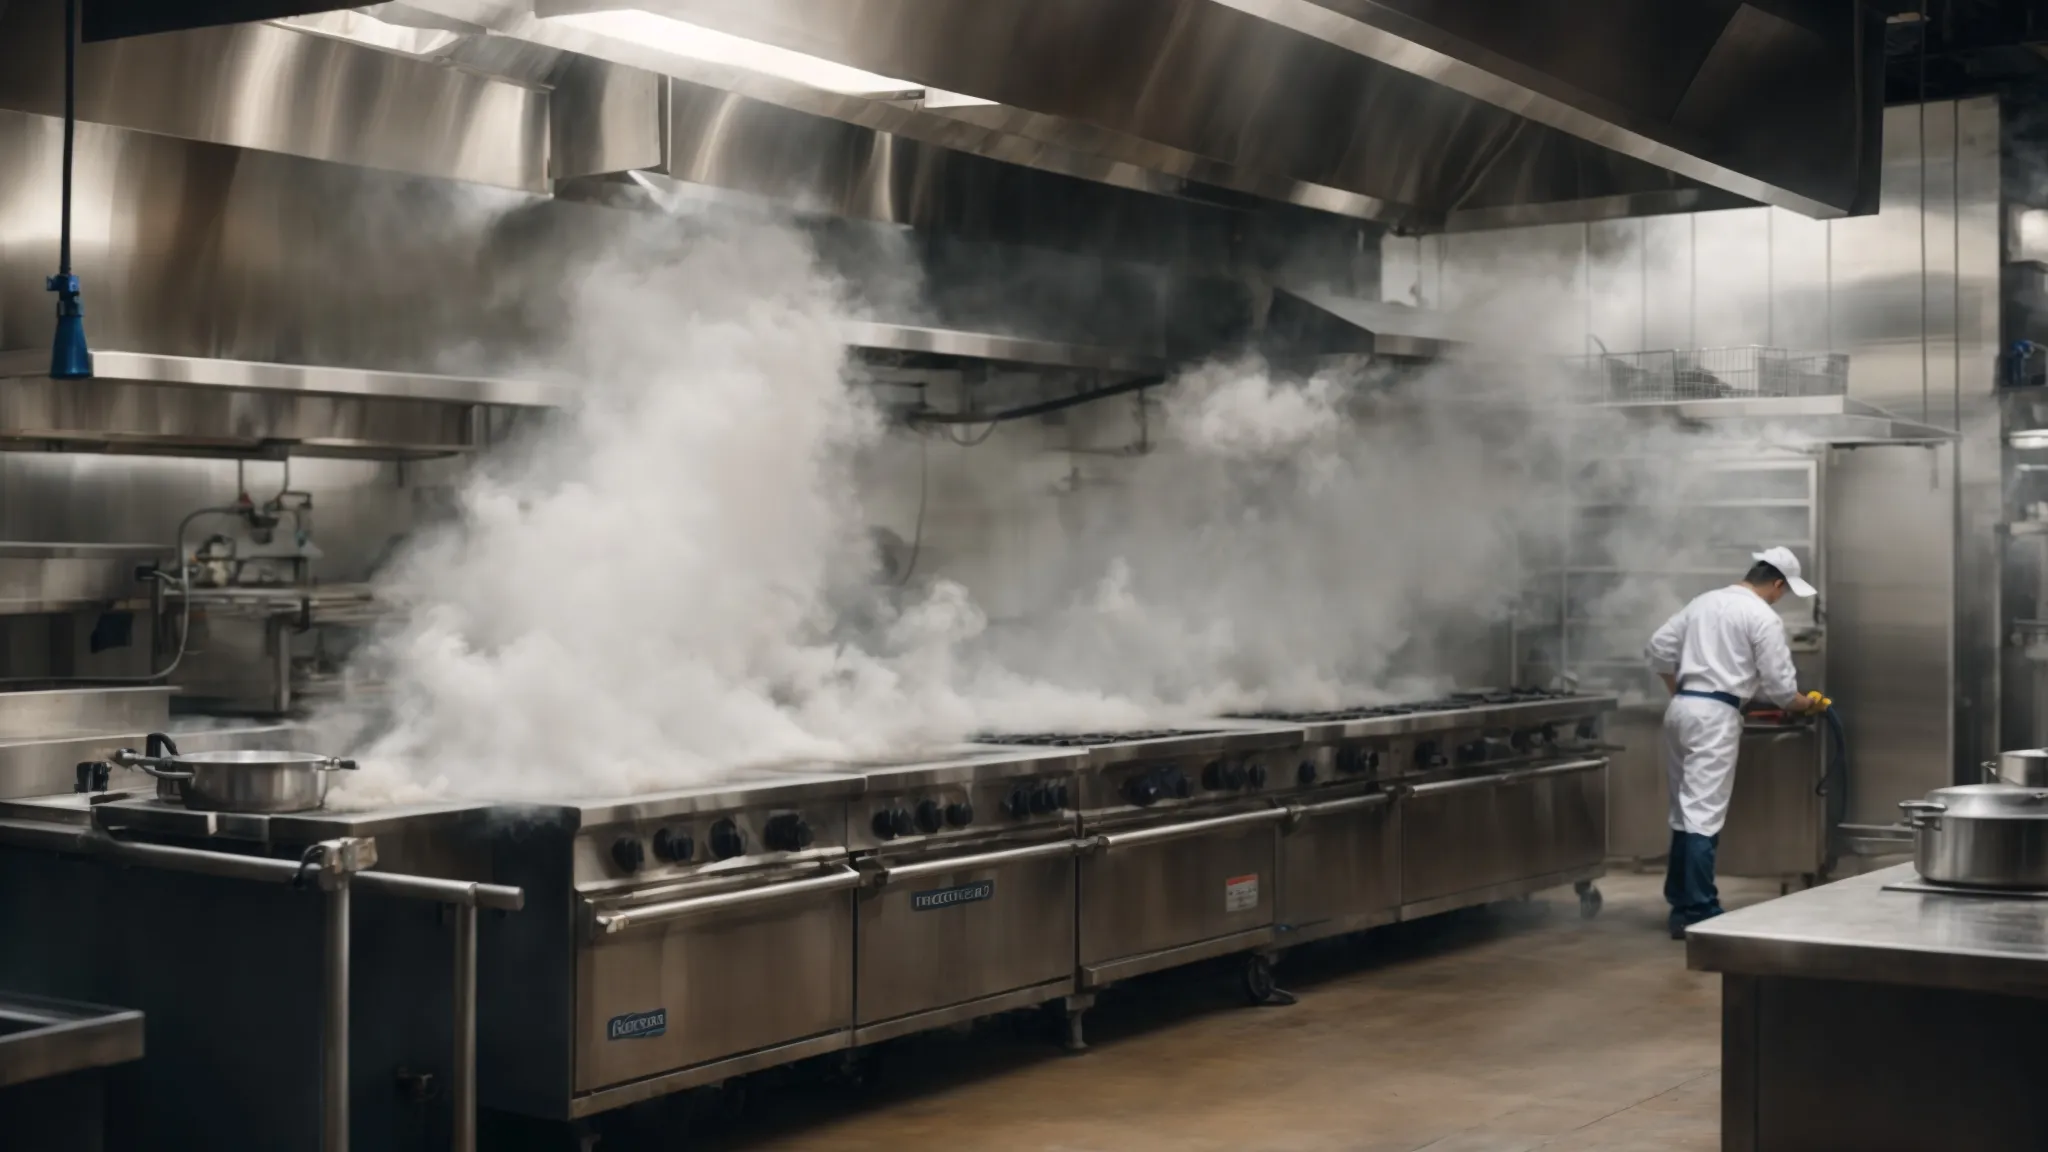 a professional cleaner power-washing a commercial Toronto Hood Cleaning kitchen hood, steam billowing around them as they work.